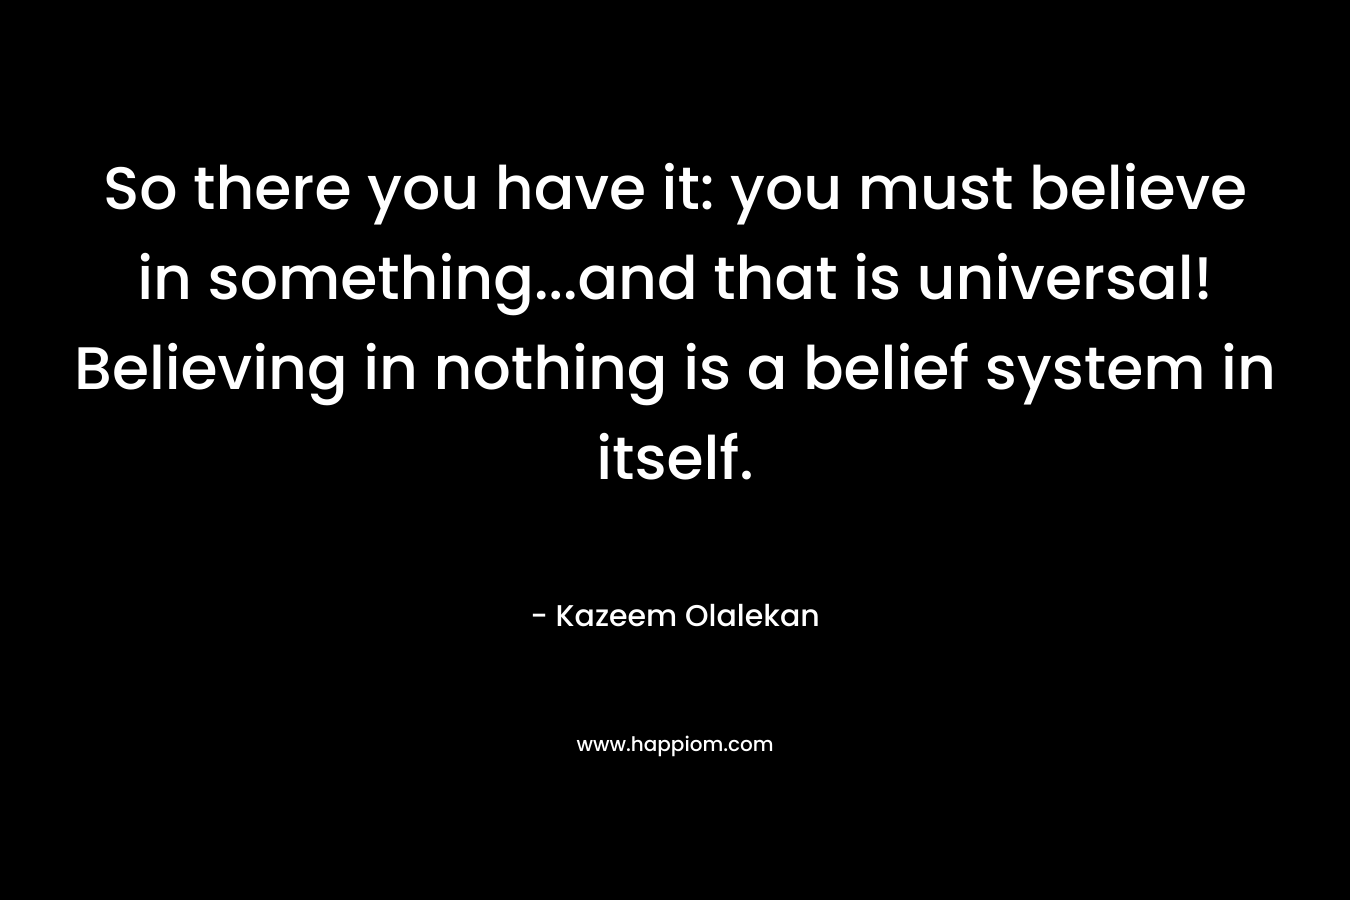 So there you have it: you must believe in something...and that is universal! Believing in nothing is a belief system in itself.